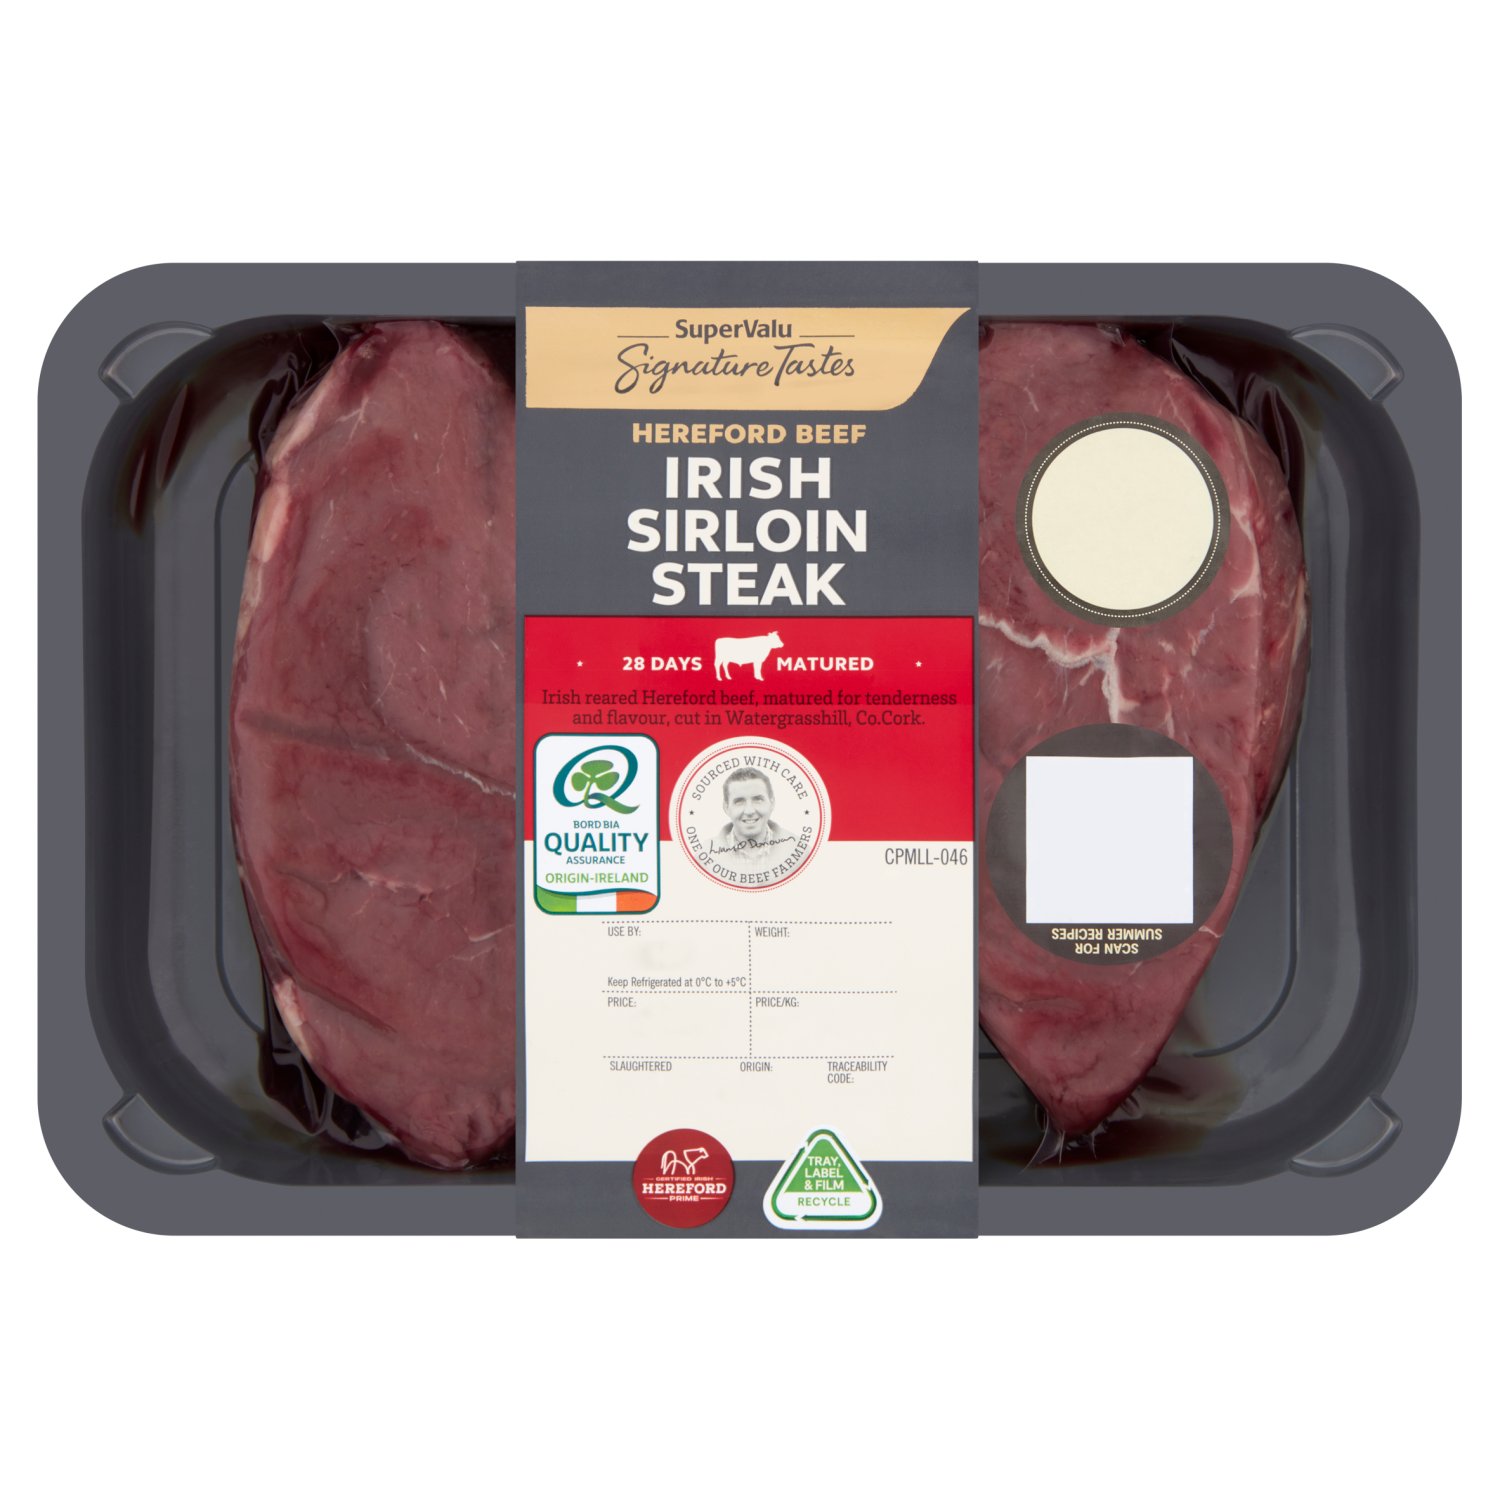 Irish reared Hereford beef, matured for tenderness and flavour, cut in Watergrasshill, Co. Cork.